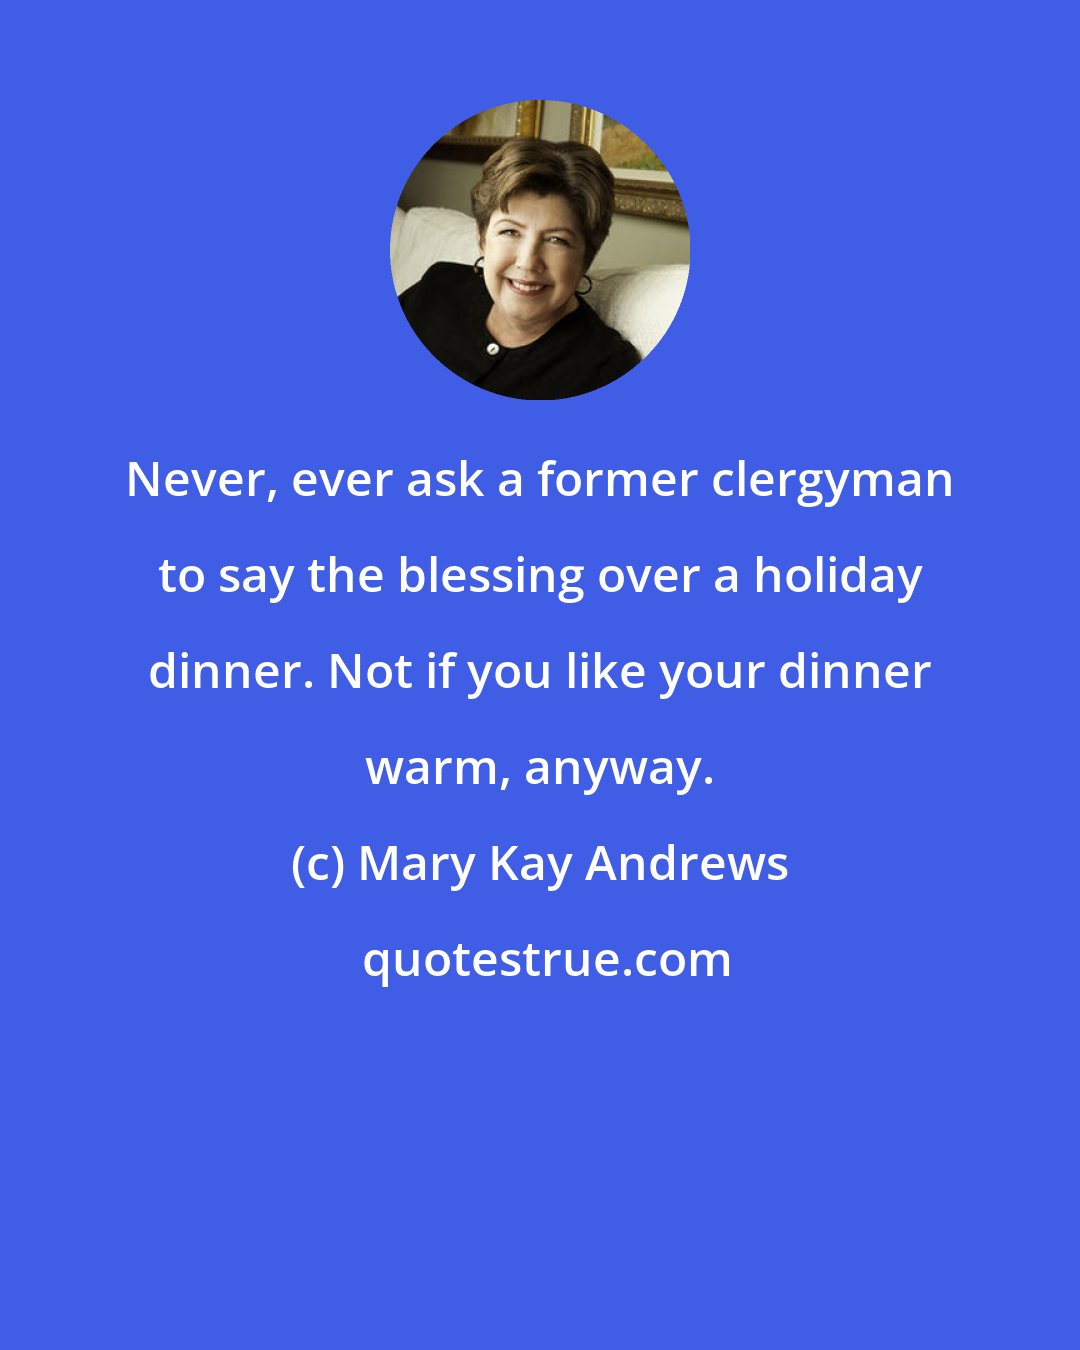 Mary Kay Andrews: Never, ever ask a former clergyman to say the blessing over a holiday dinner. Not if you like your dinner warm, anyway.